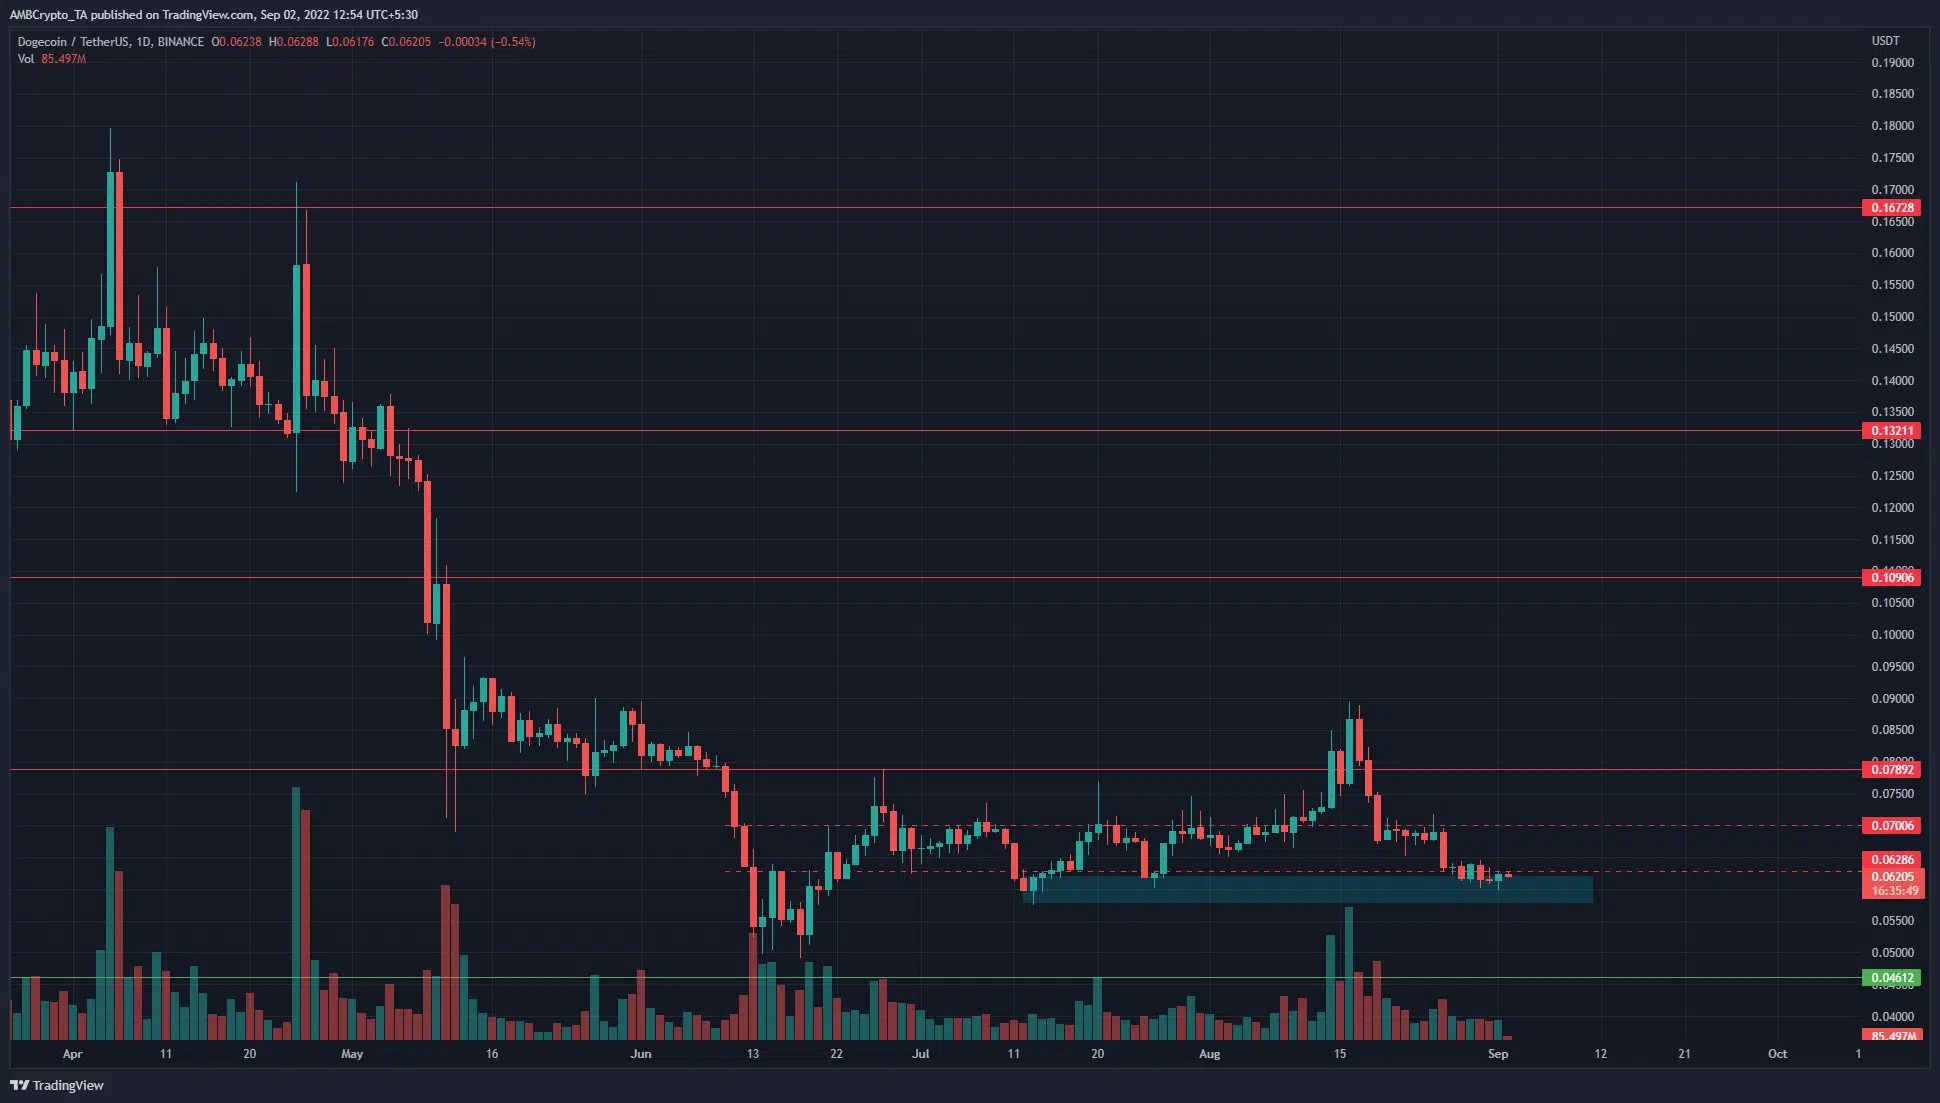 Dogecoin finds some footing in a support zone, but momentum favored the bears